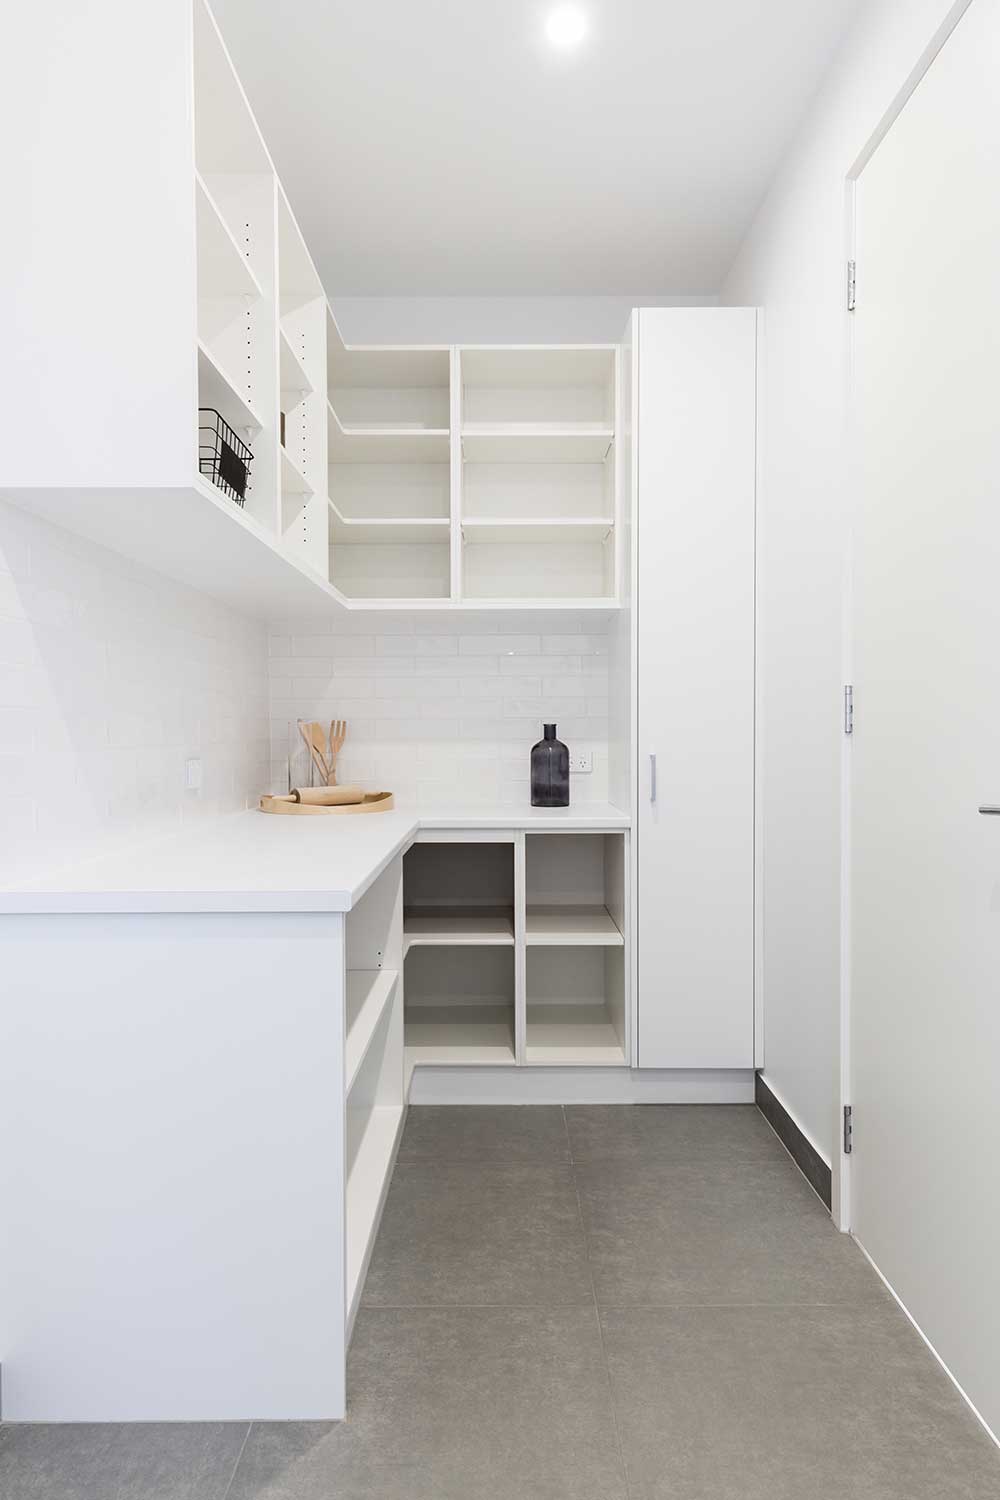 Large walk-in butlers pantry storage area in a new home